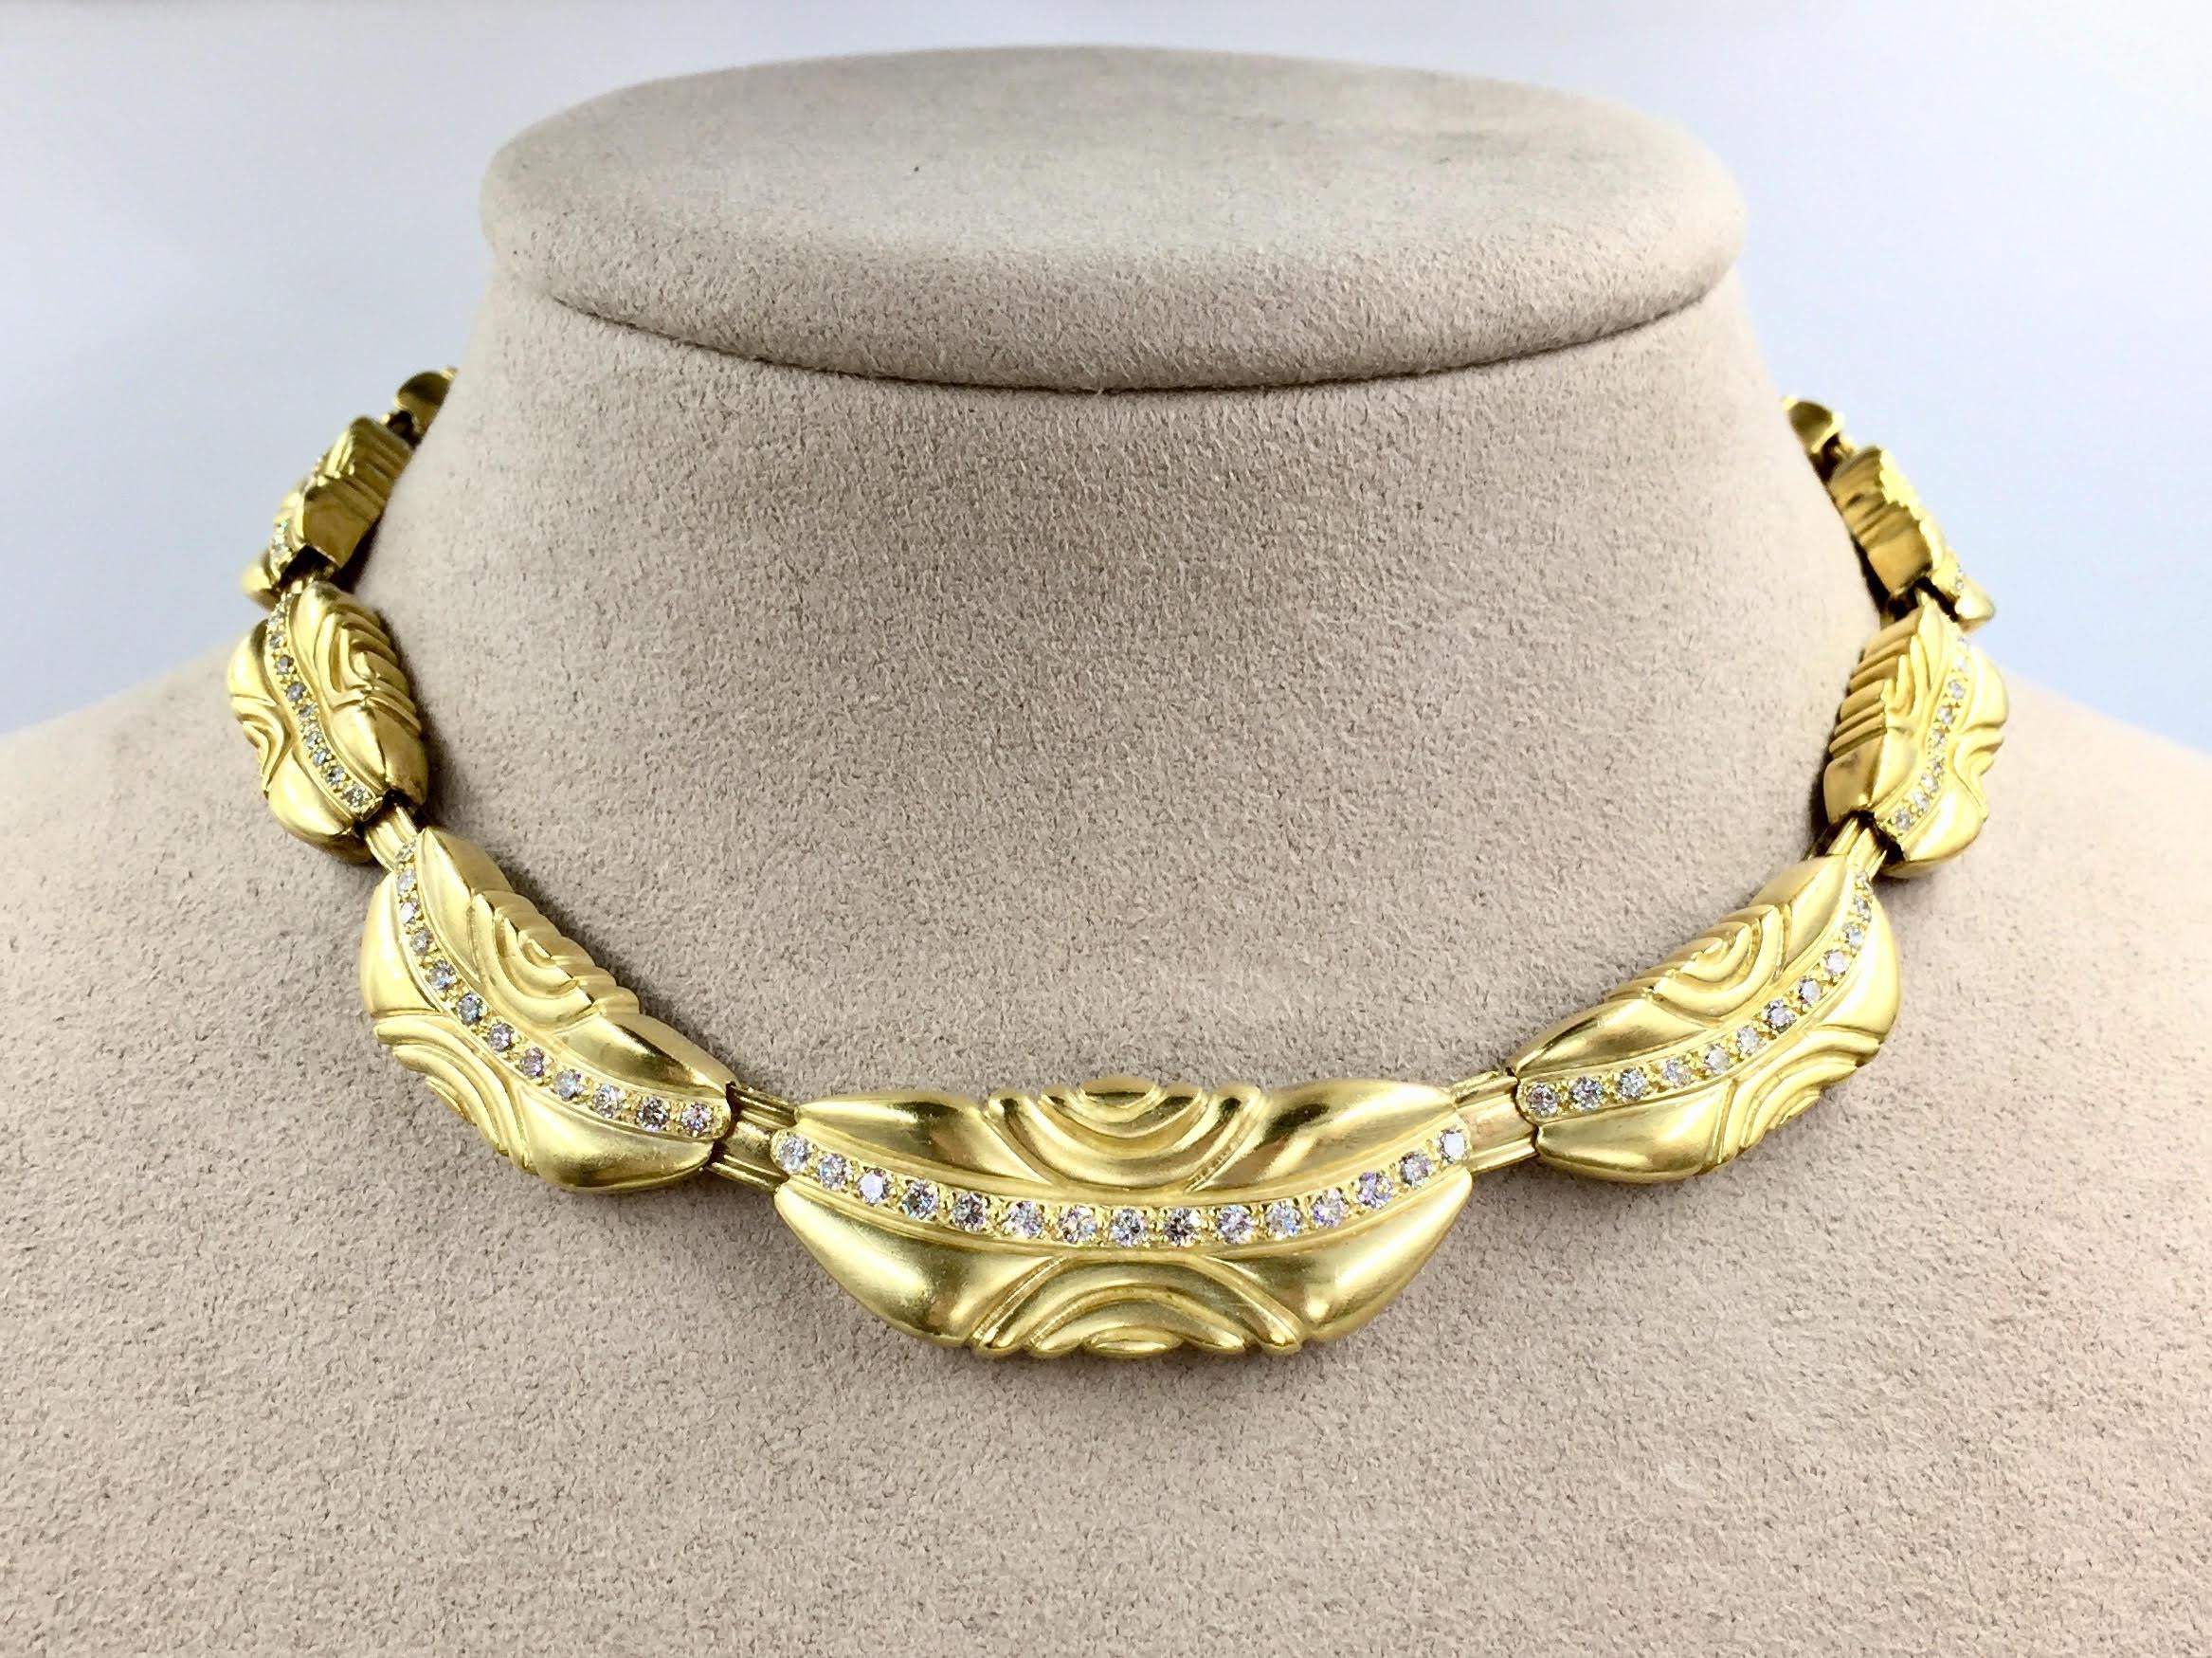 Authentic signed 18k Naltchayan yellow gold necklace. Done in a classic acid wash matte finish and swirl accents of Naltchayan design. Inspired by Greek, Byzantine and Turkish designs, Vahe Naltchayan jewelry is hand made in the USA. This necklace